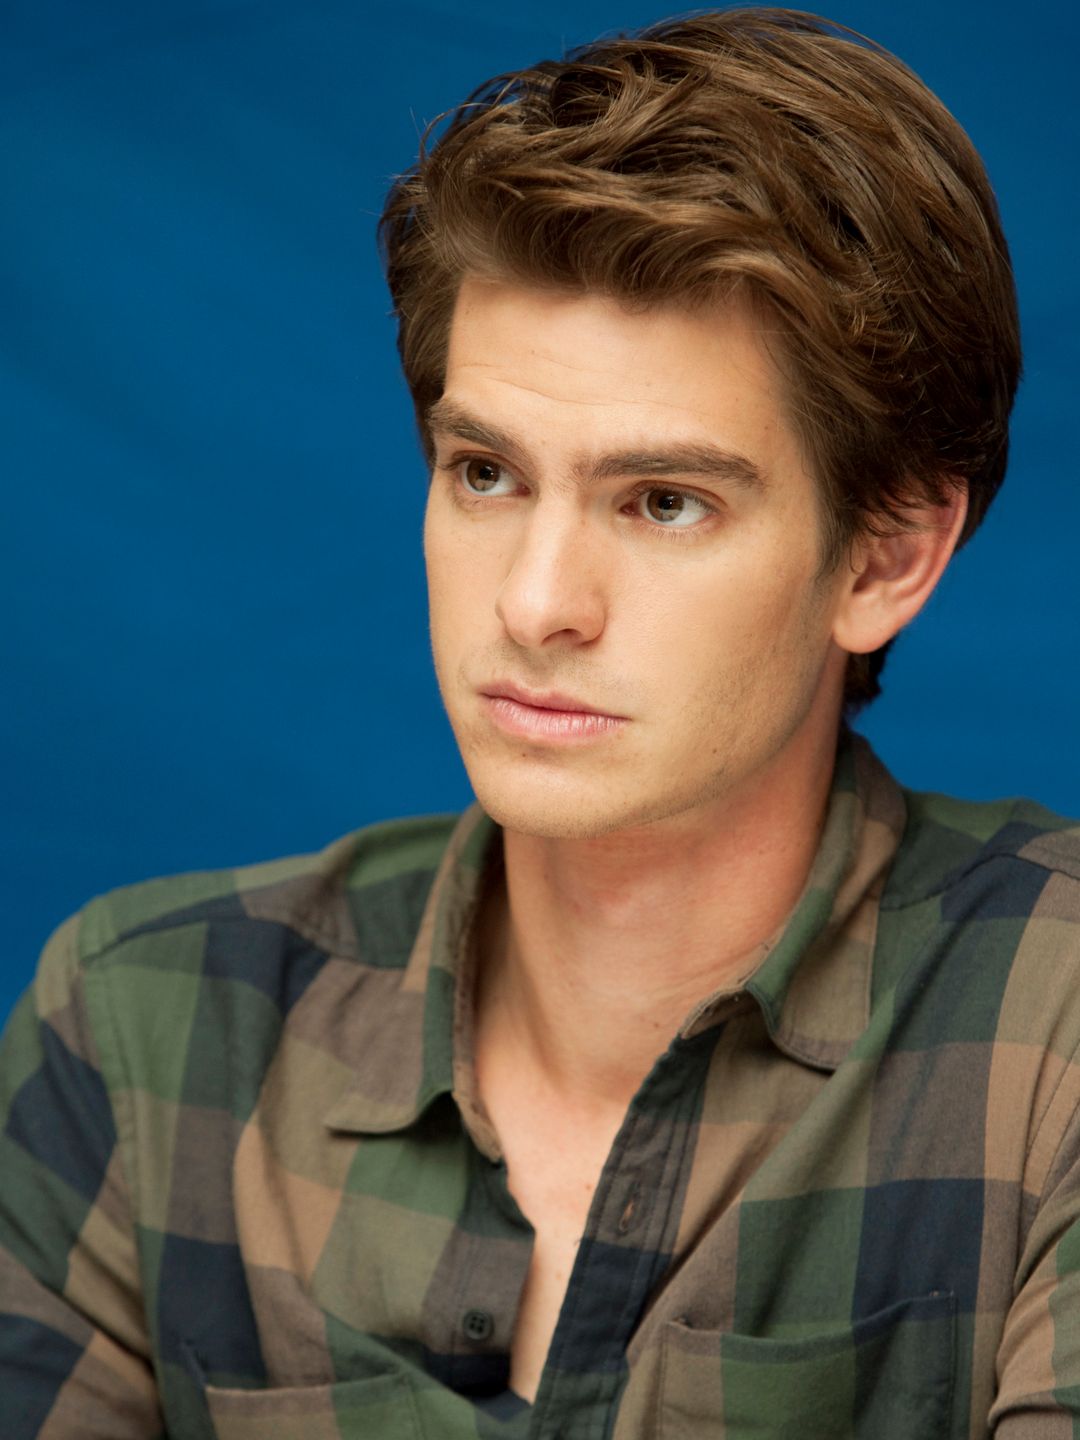 Andrew Garfield in his youth